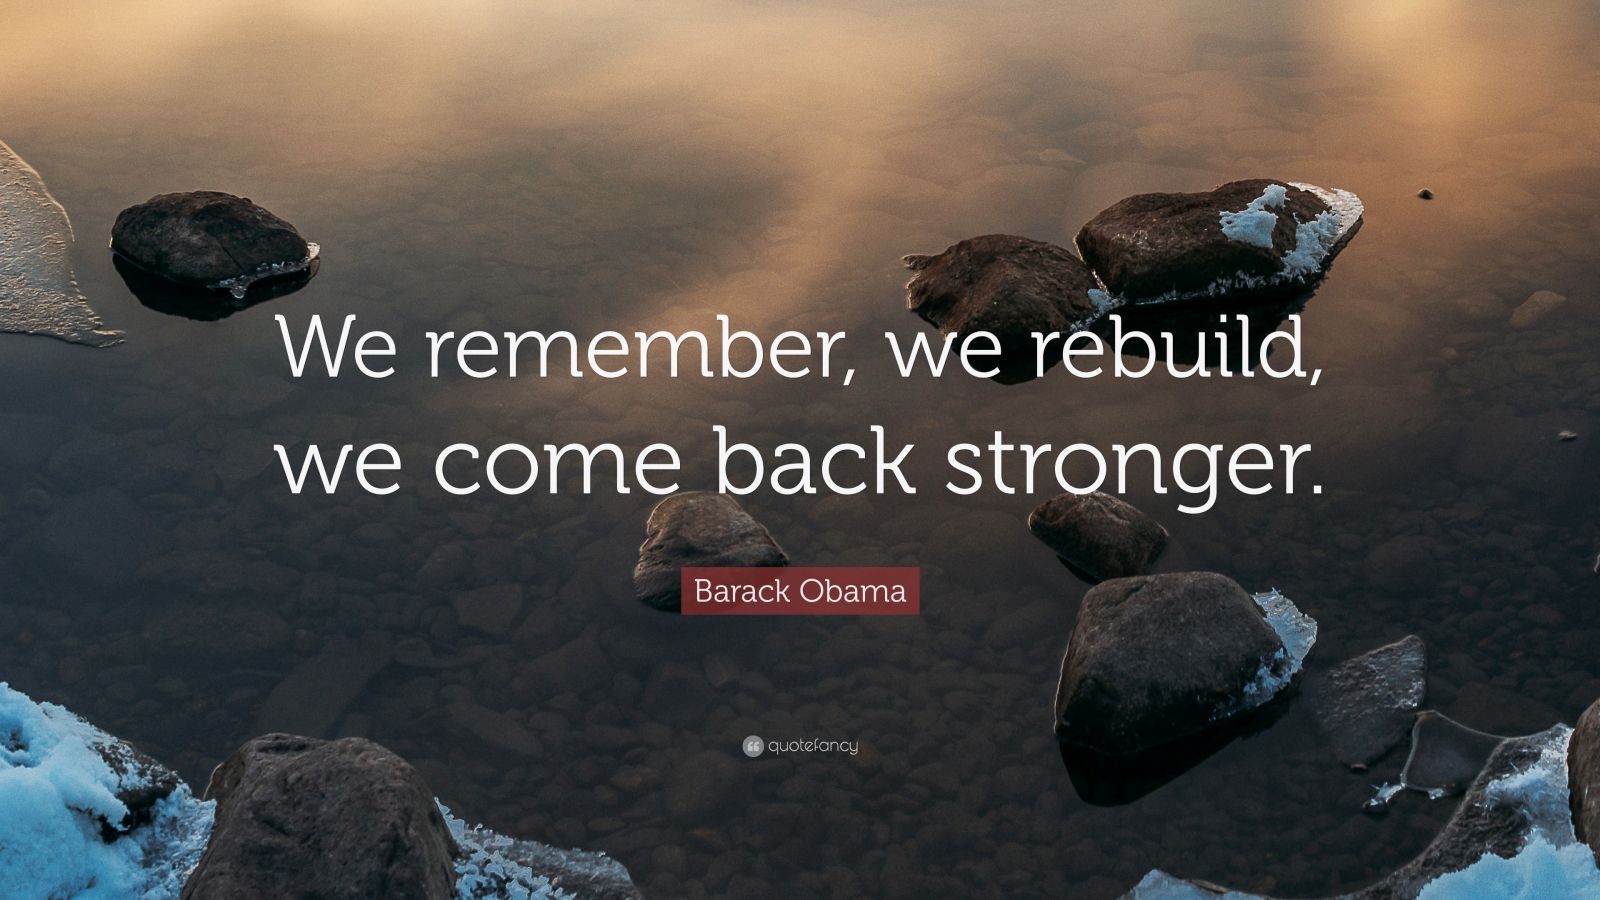 Stronger back come obama barack quotes rebuild remember quote quotefancy wallpaper